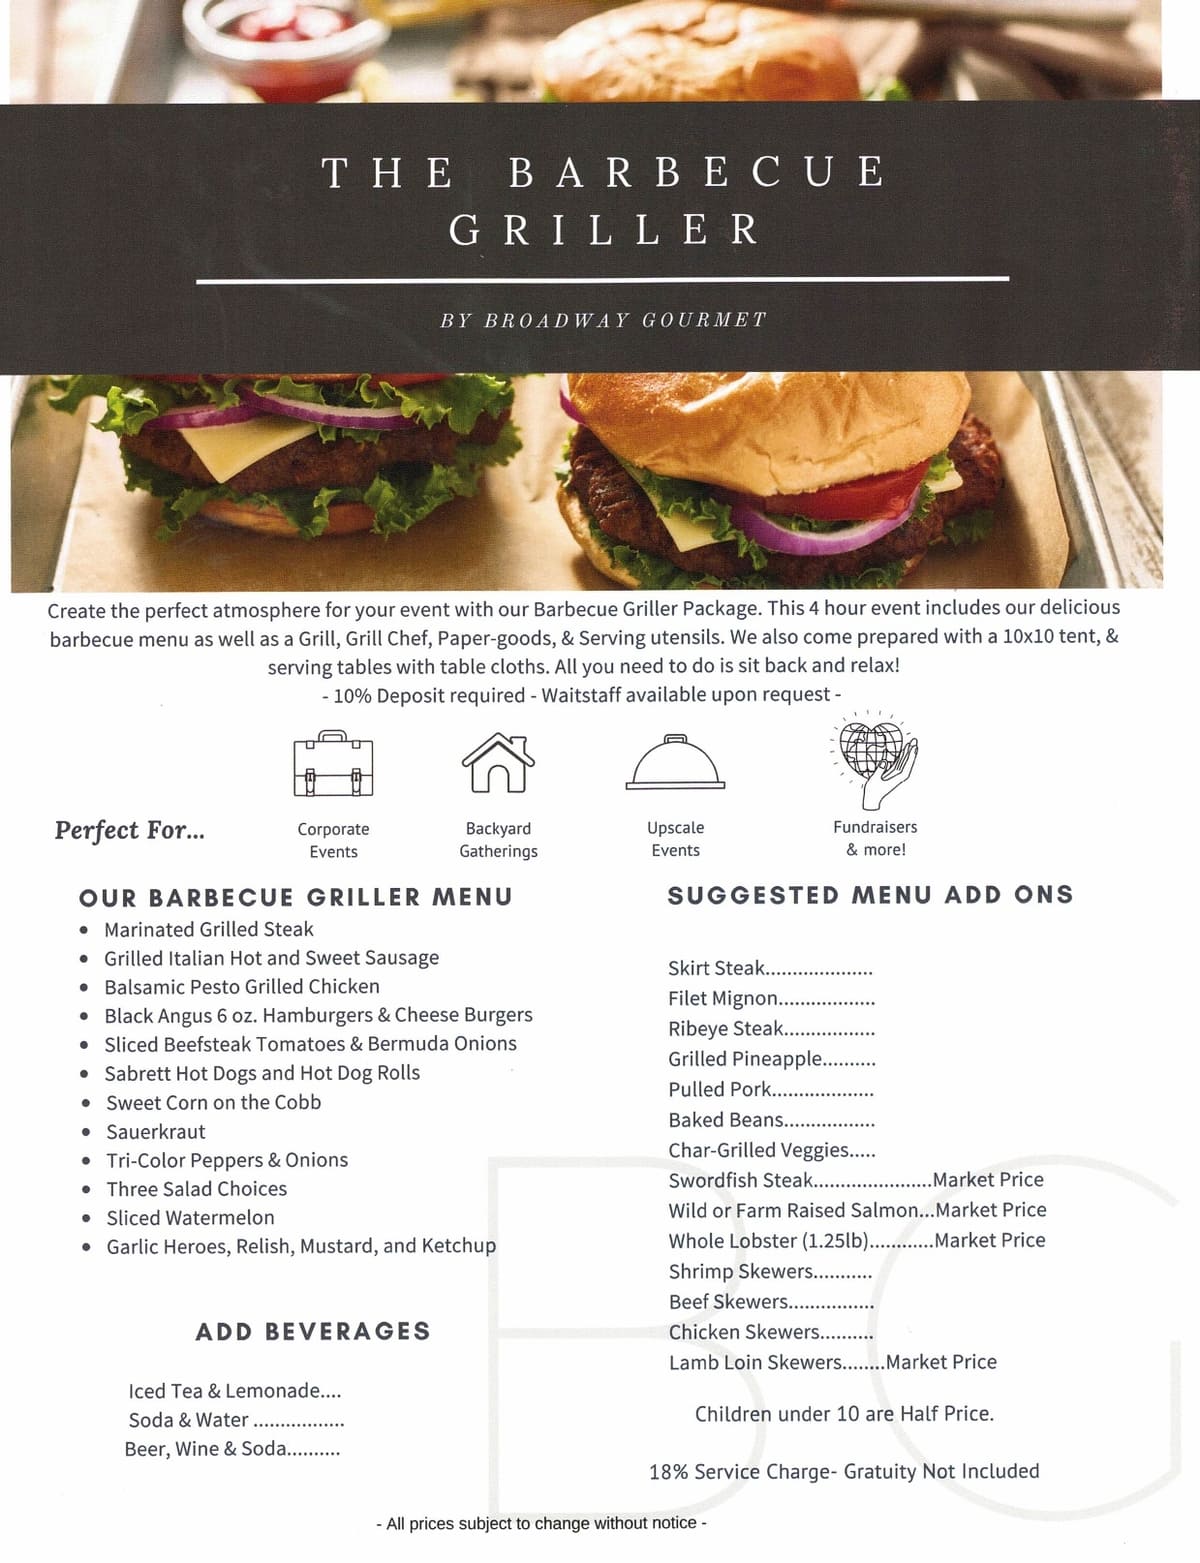 Catering Menu - The Barbecue Griller